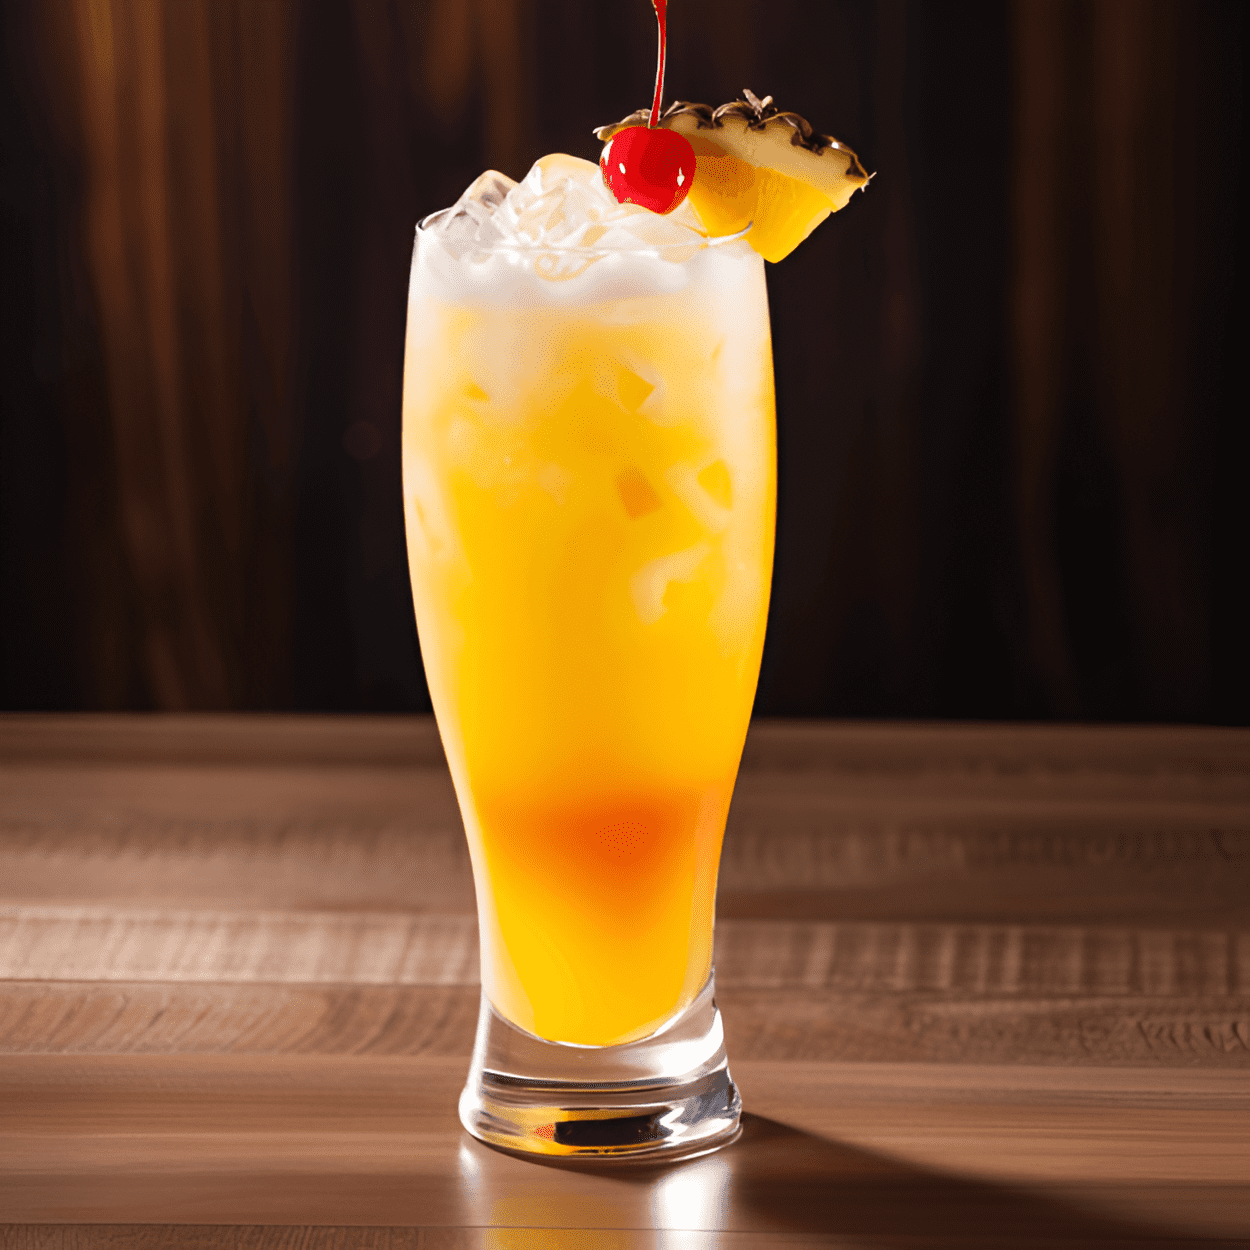 Juicy Fruit Cocktail Recipe - The Juicy Fruit Cocktail is a delightful blend of sweet and sour, with a hint of tropical fruit. It's light, refreshing, and bursting with fruity flavors. The sweetness of the pineapple juice is perfectly balanced by the tartness of the lemon juice, creating a cocktail that is both refreshing and satisfying.